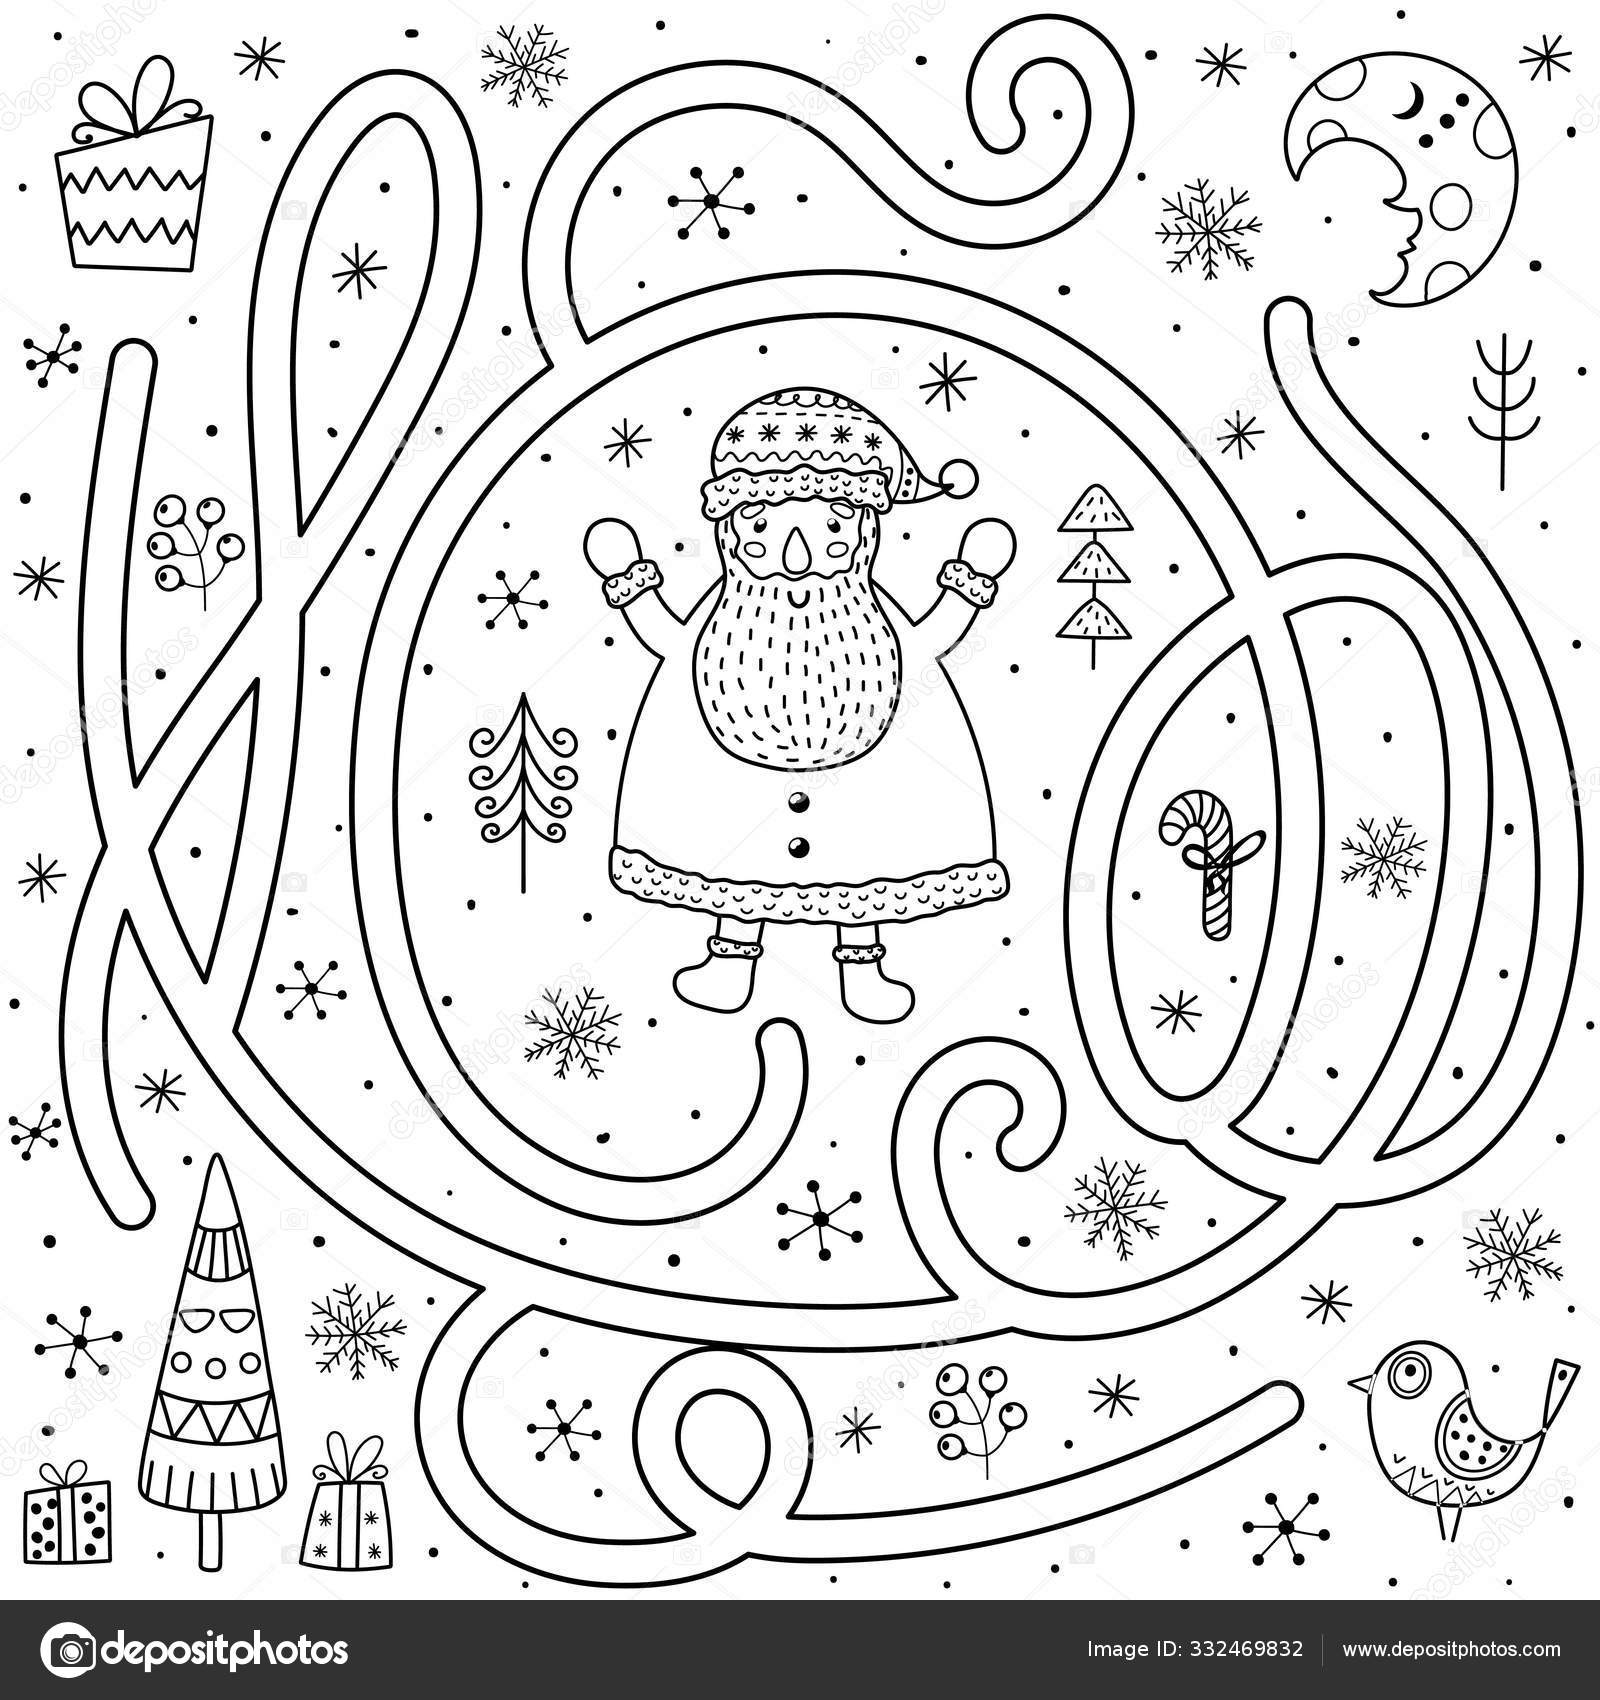 Black and white maze game for kids help the santa claus find the way to the christmas tree stock vector by juliyas